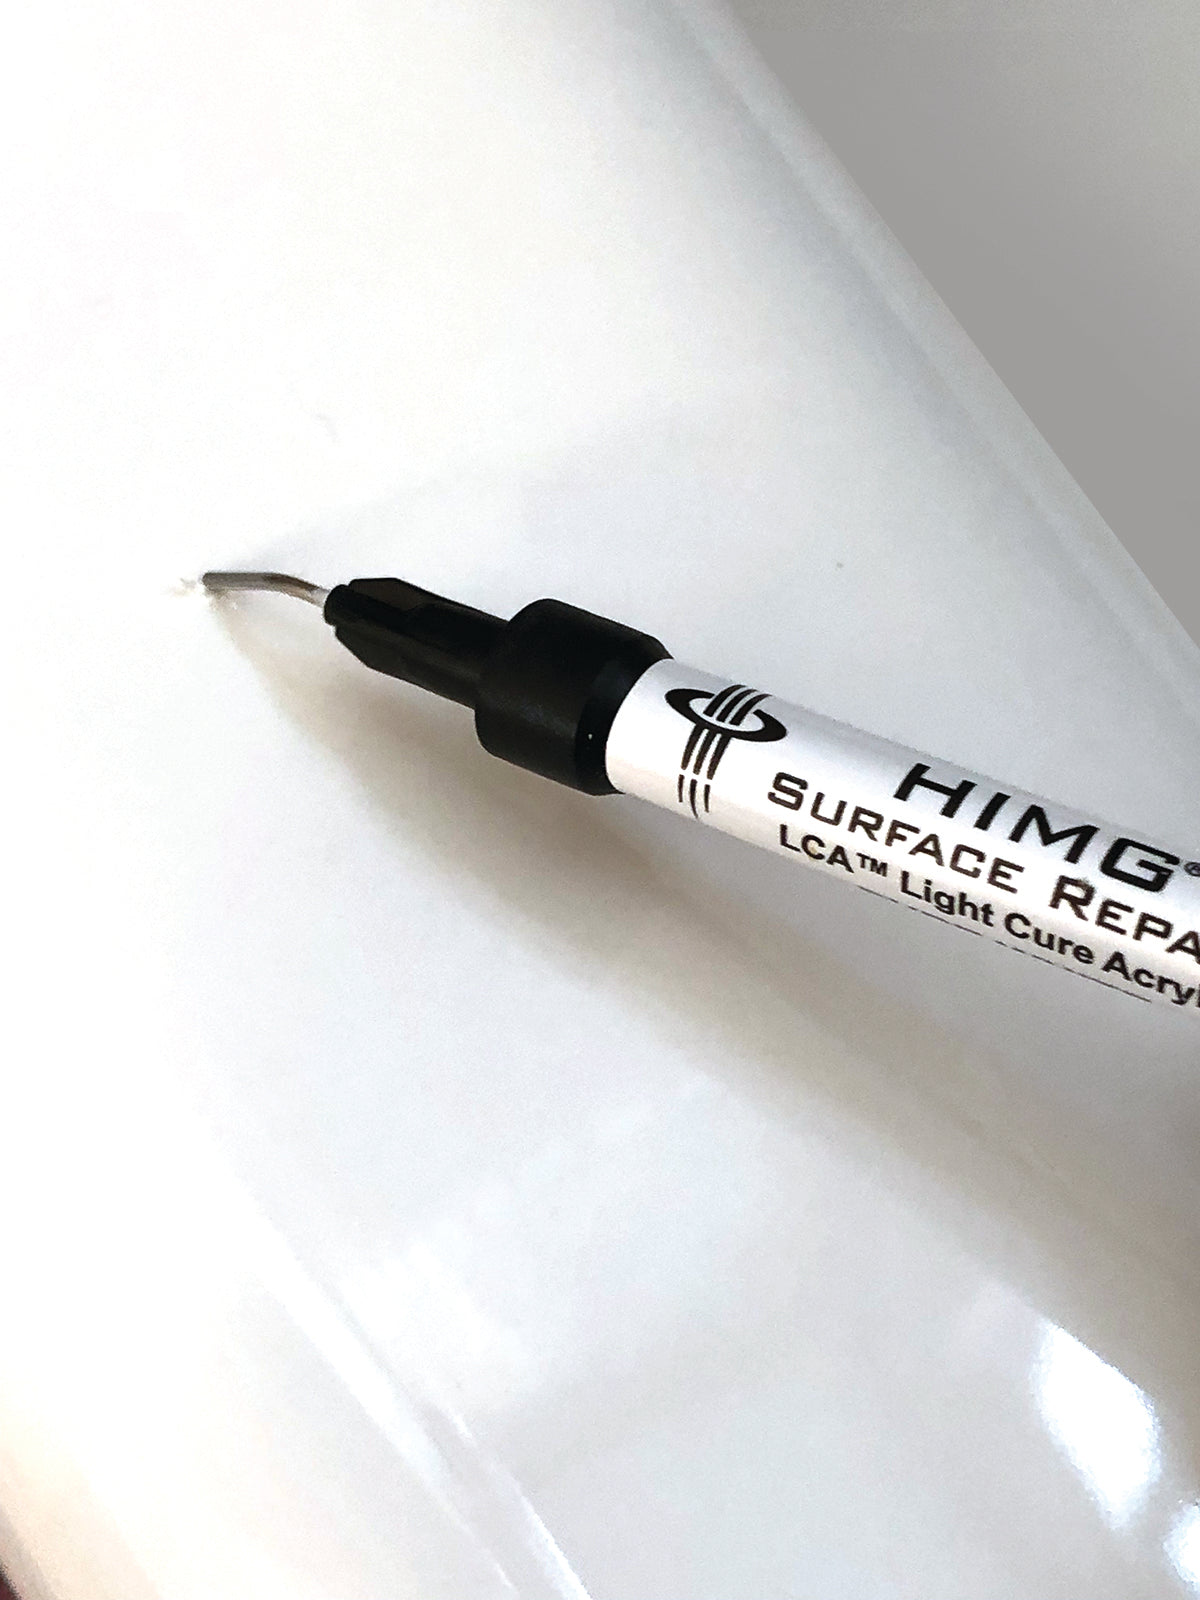 LCA Application with Light Cure Acrylic Applicator from HIMG Surface Repair